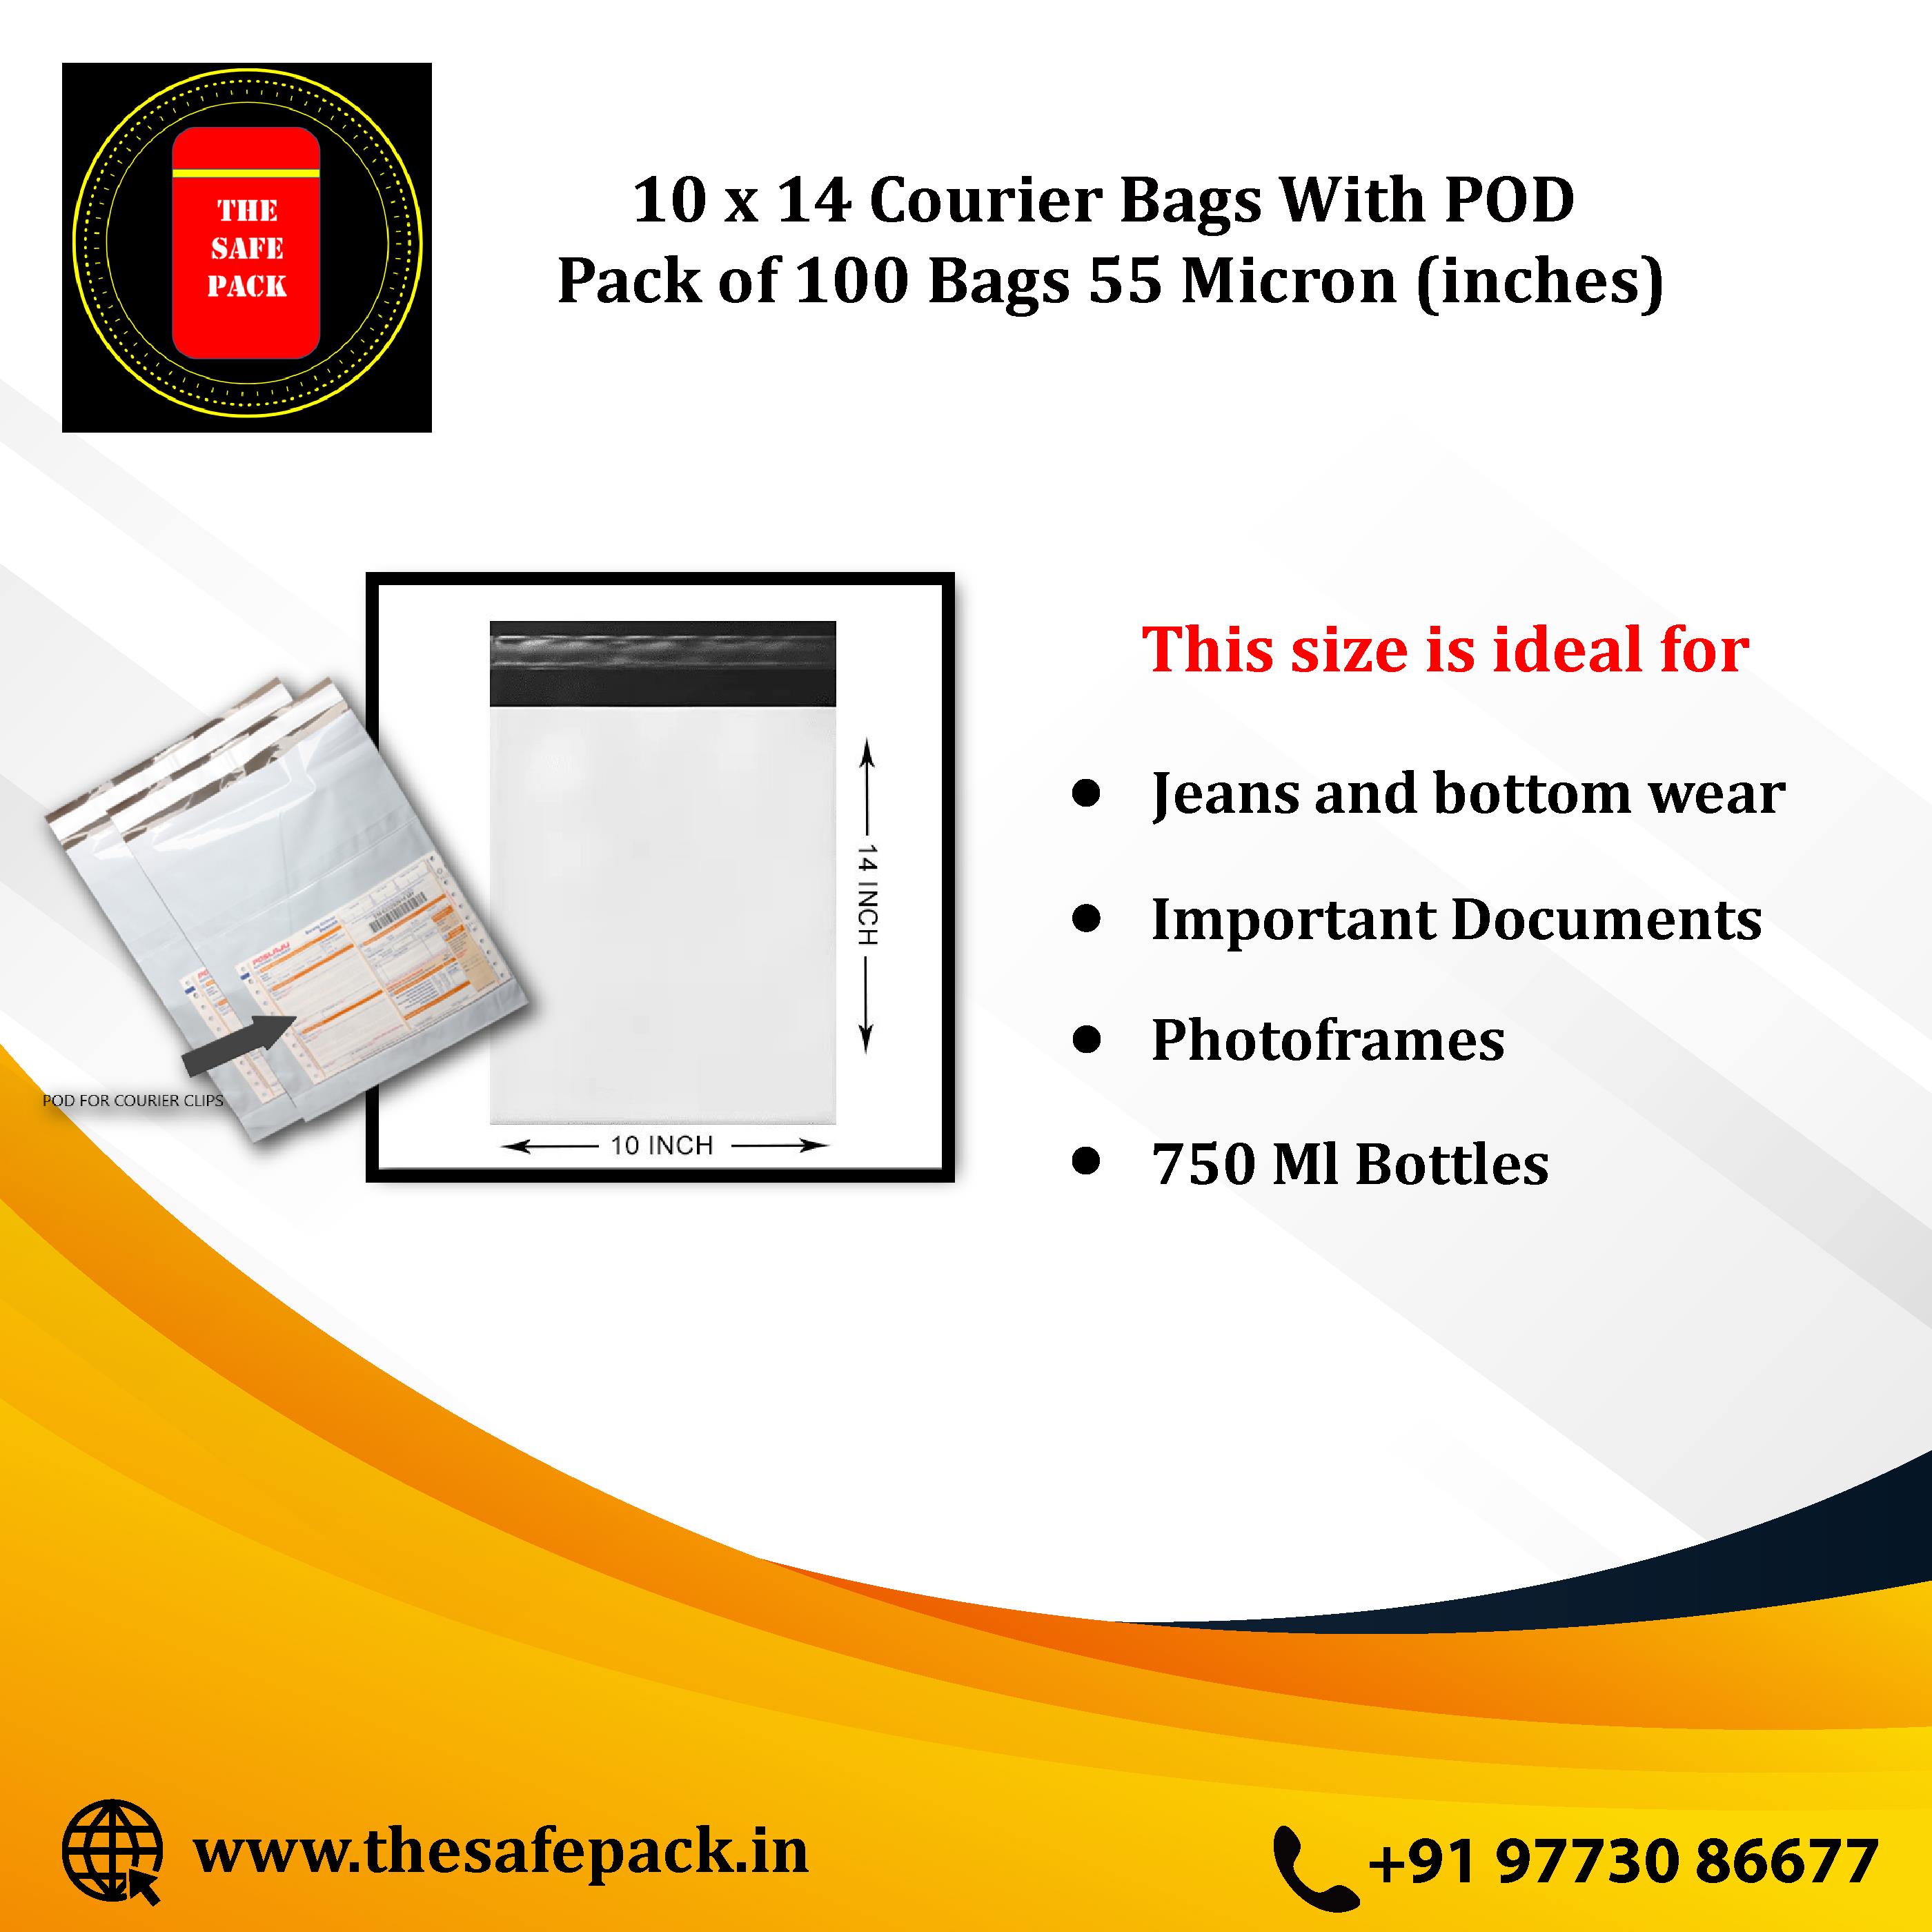 Customised Courier Bags with POD